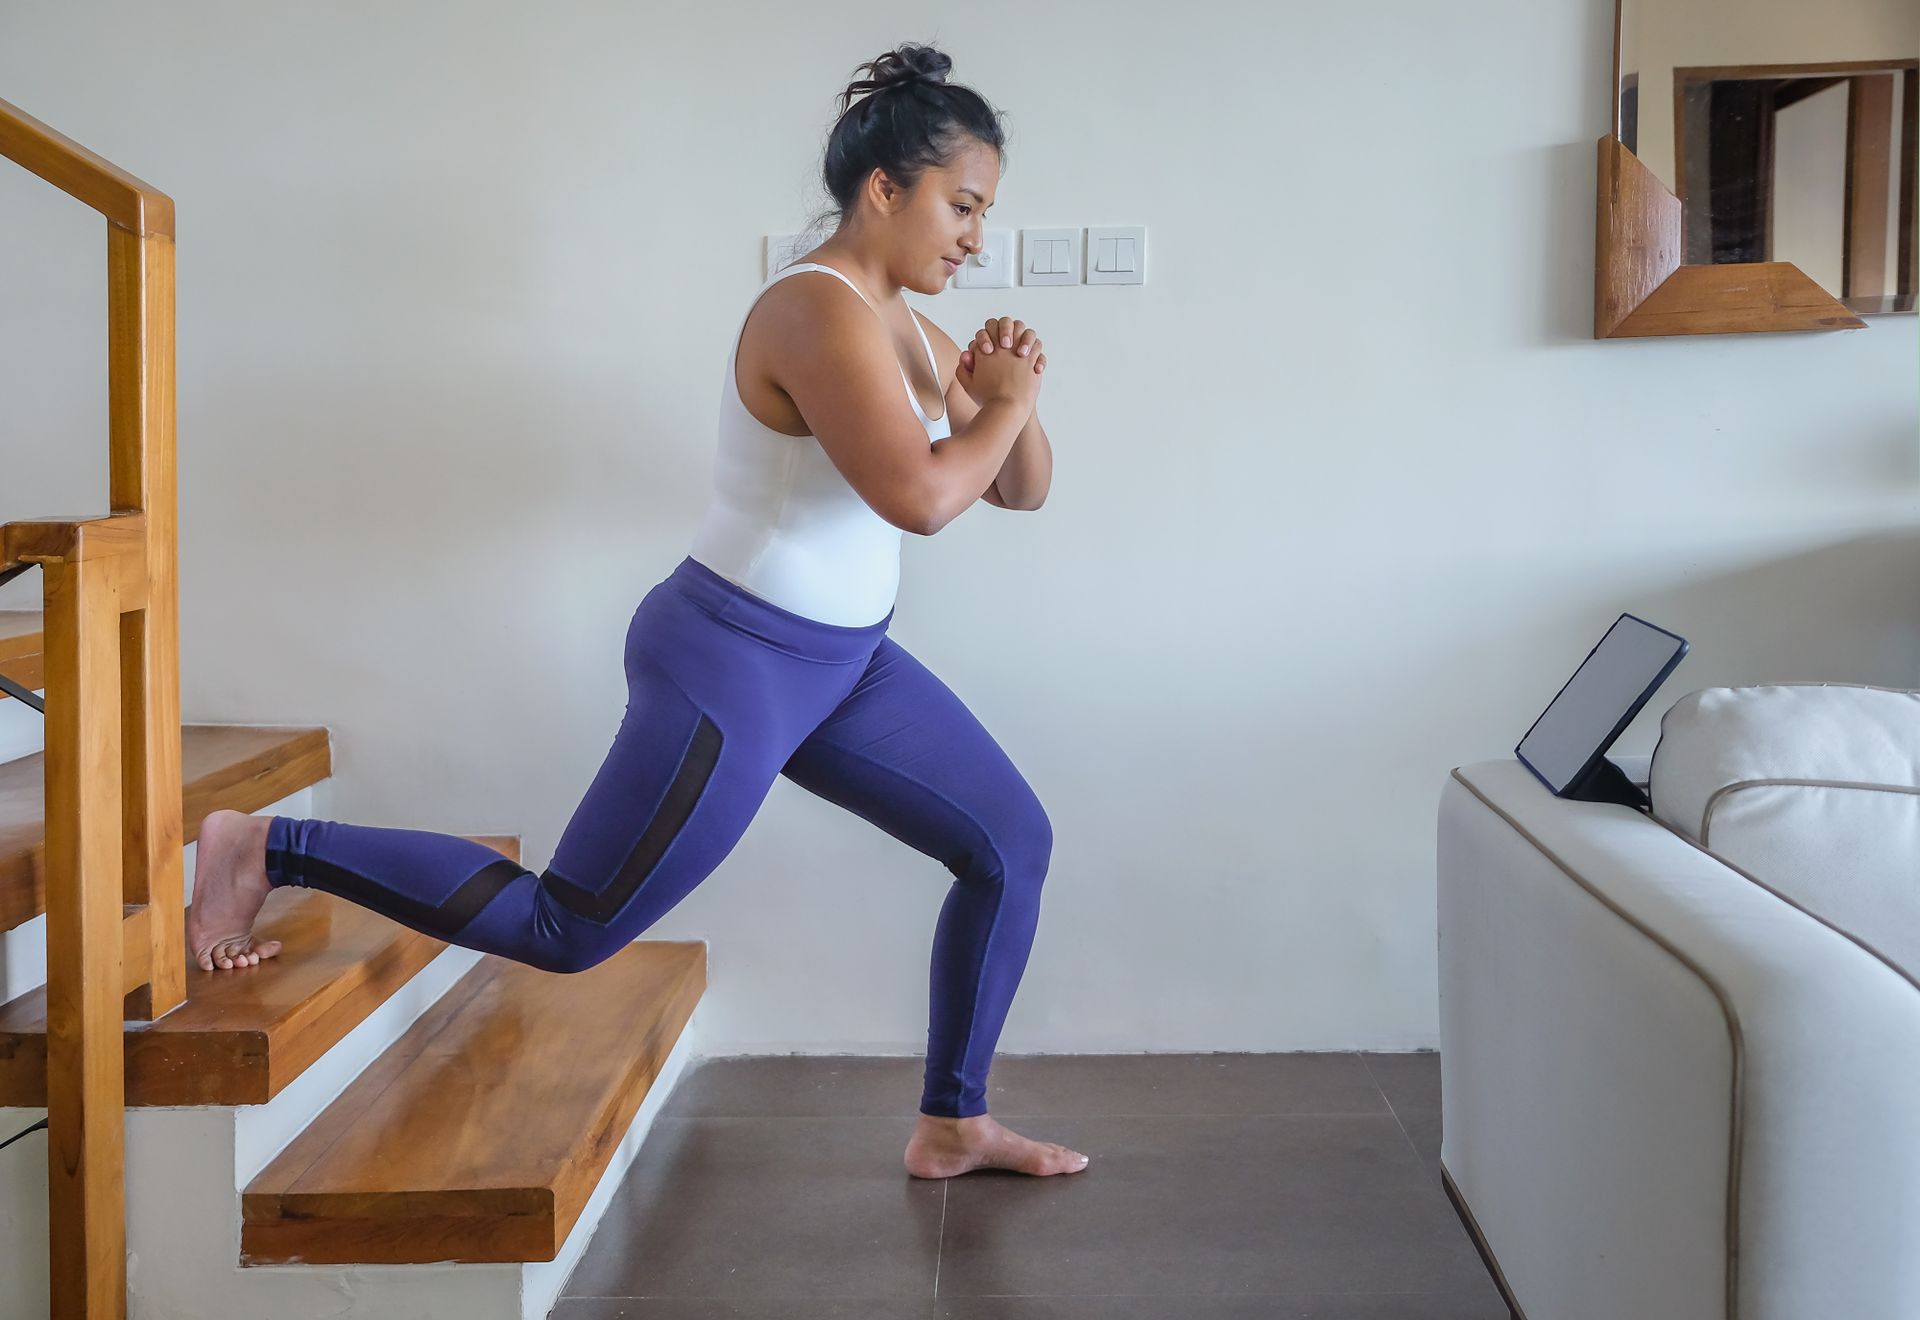 stair workouts you can do at home